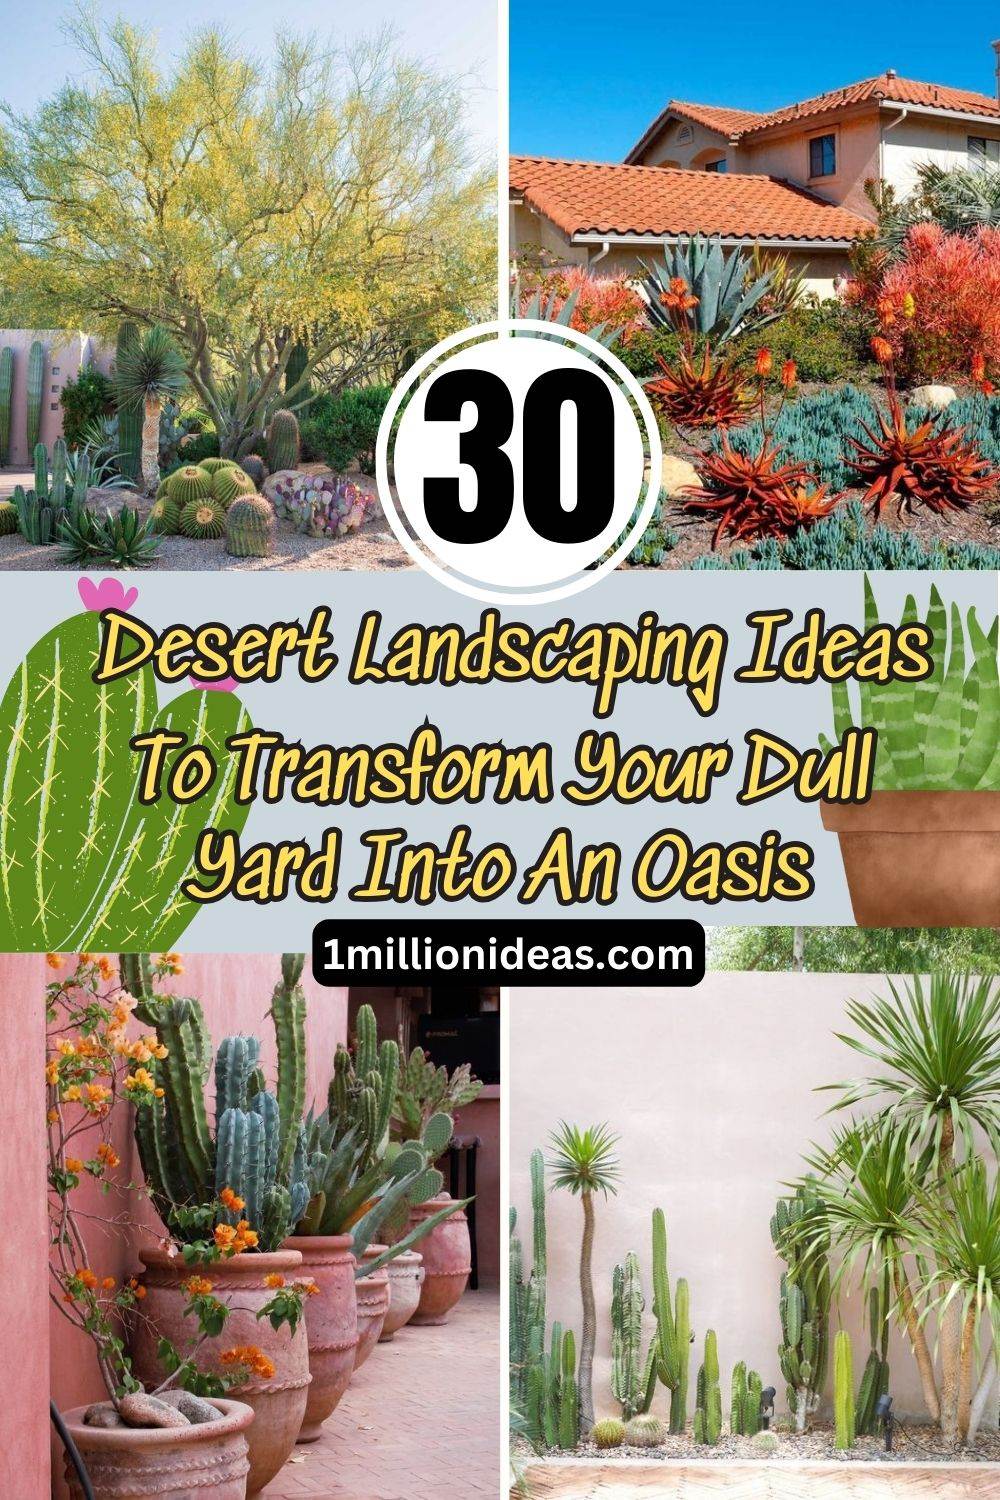 30 Desert Landscaping Ideas To Transform Your Dull Yard Into An Oasis - 191